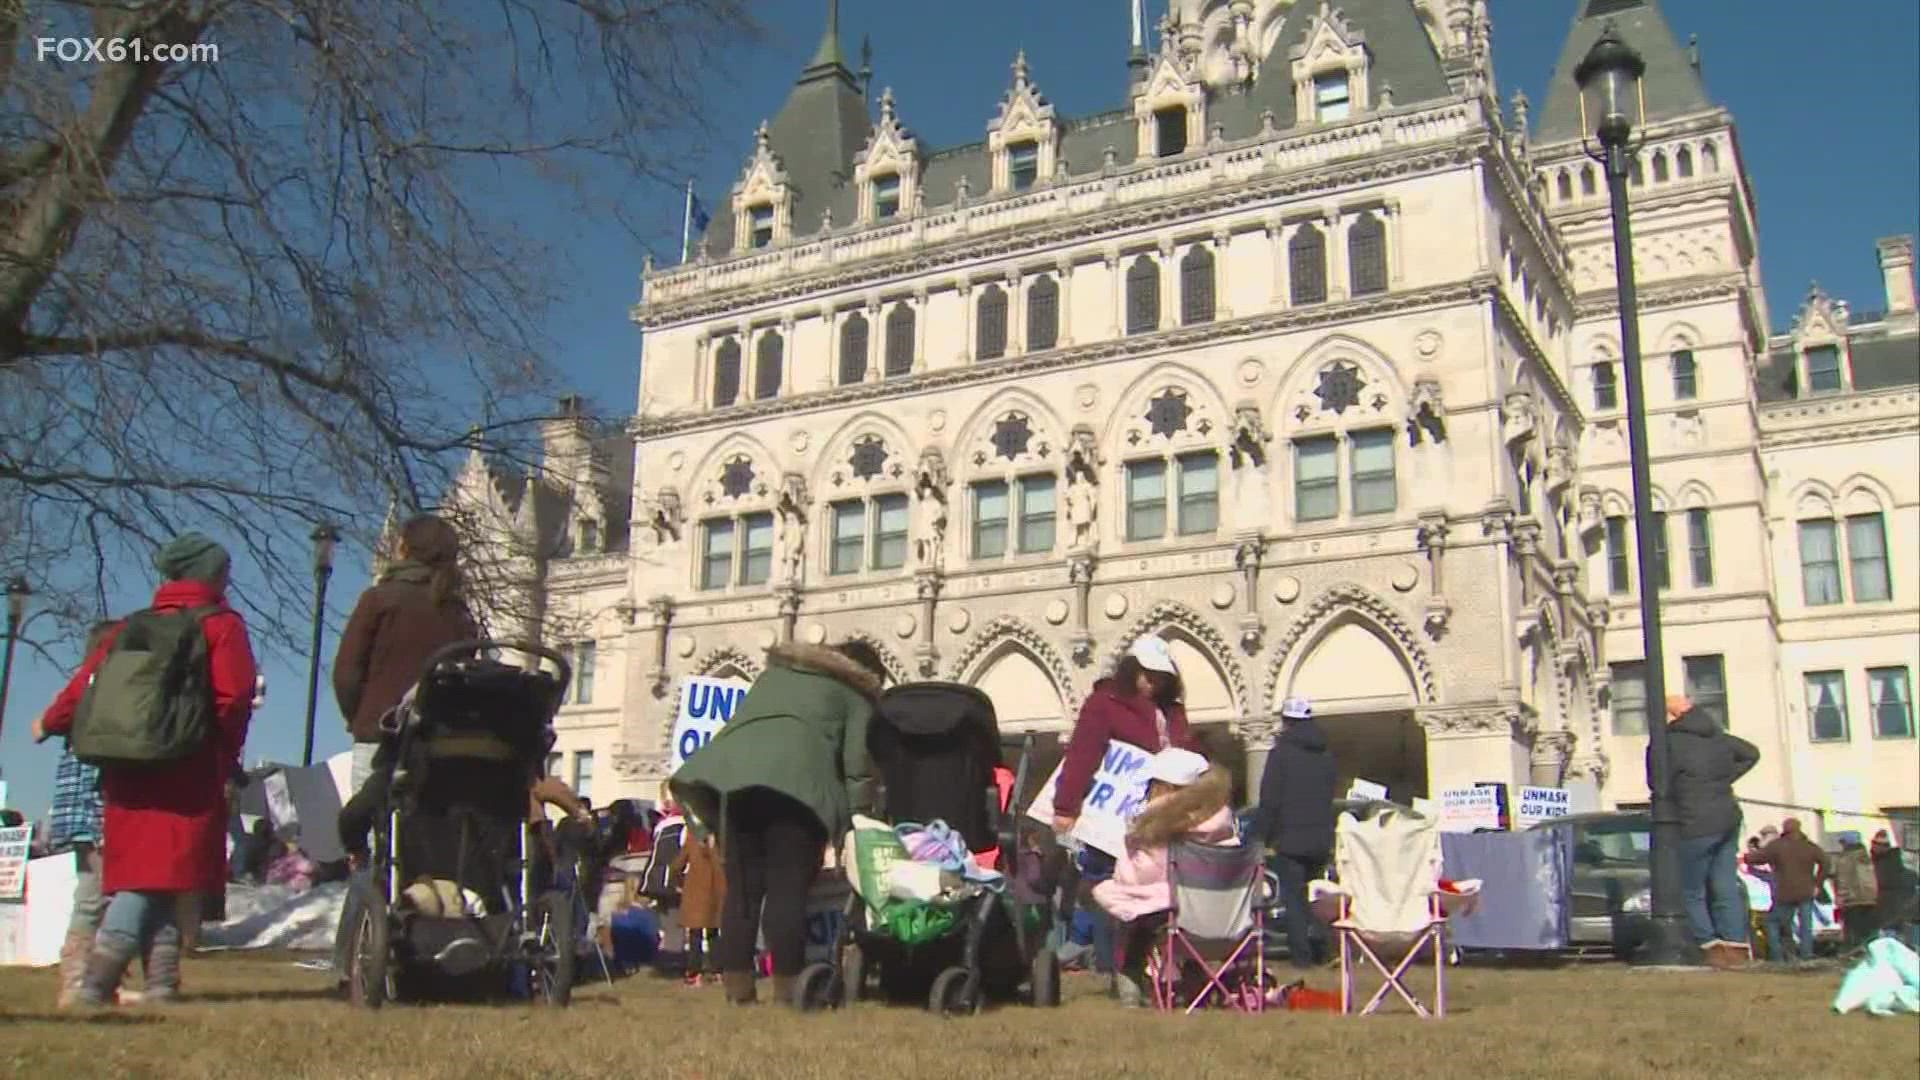 While Gov. Ned Lamont was delivering his State of the State address inside the State Capitol, a rally of parents and students demanded choice on masking of students.